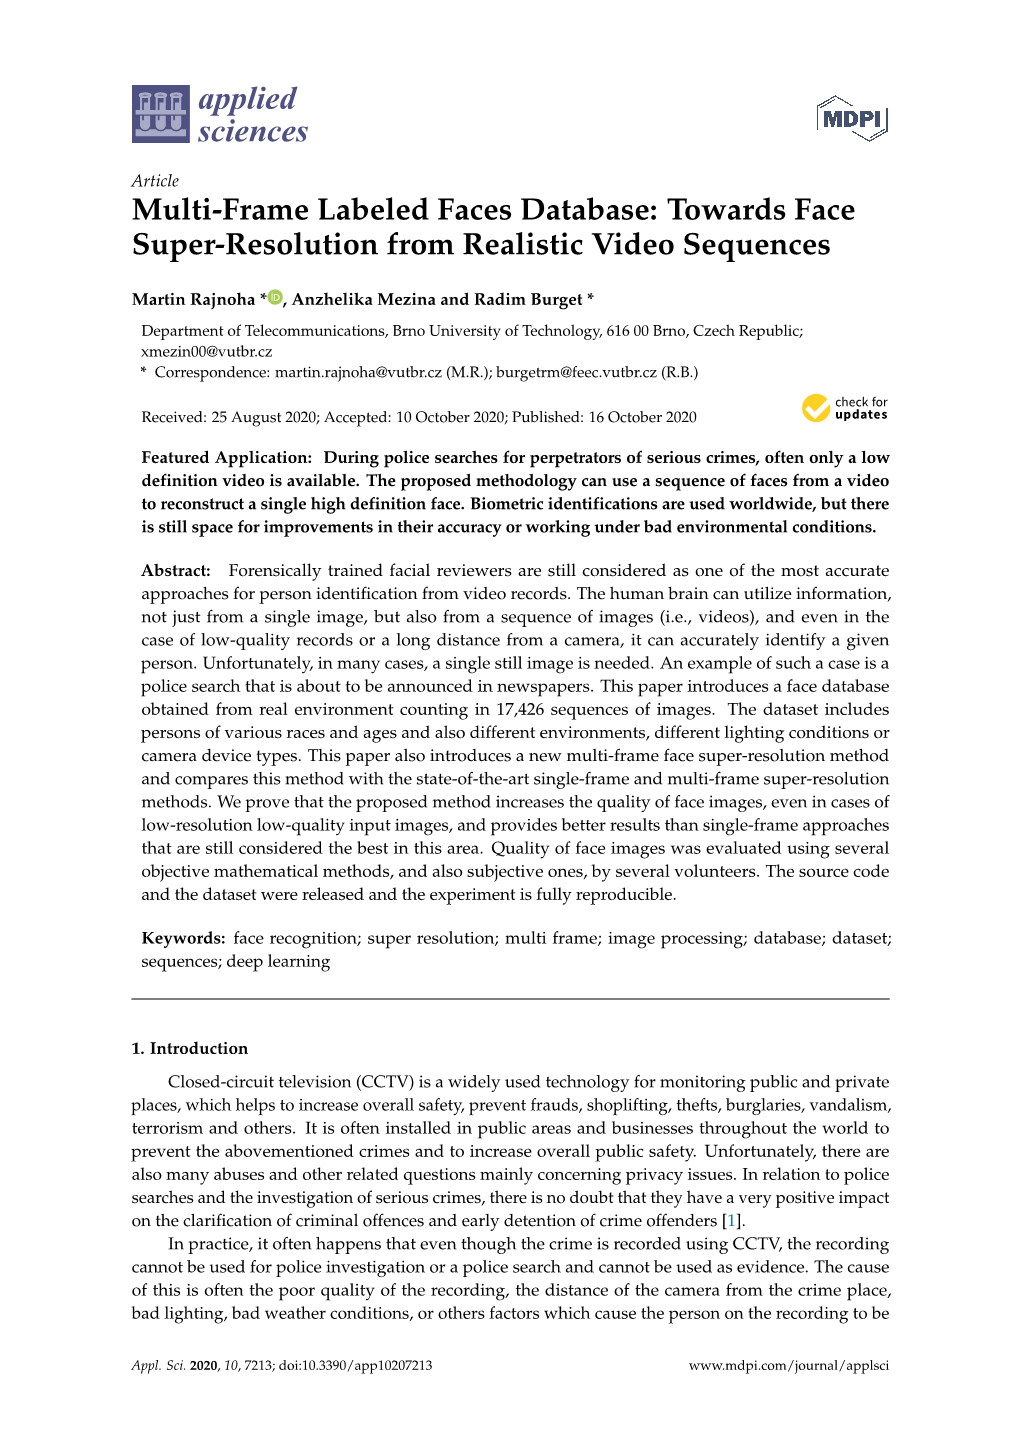 Towards Face Super-Resolution from Realistic Video Sequences